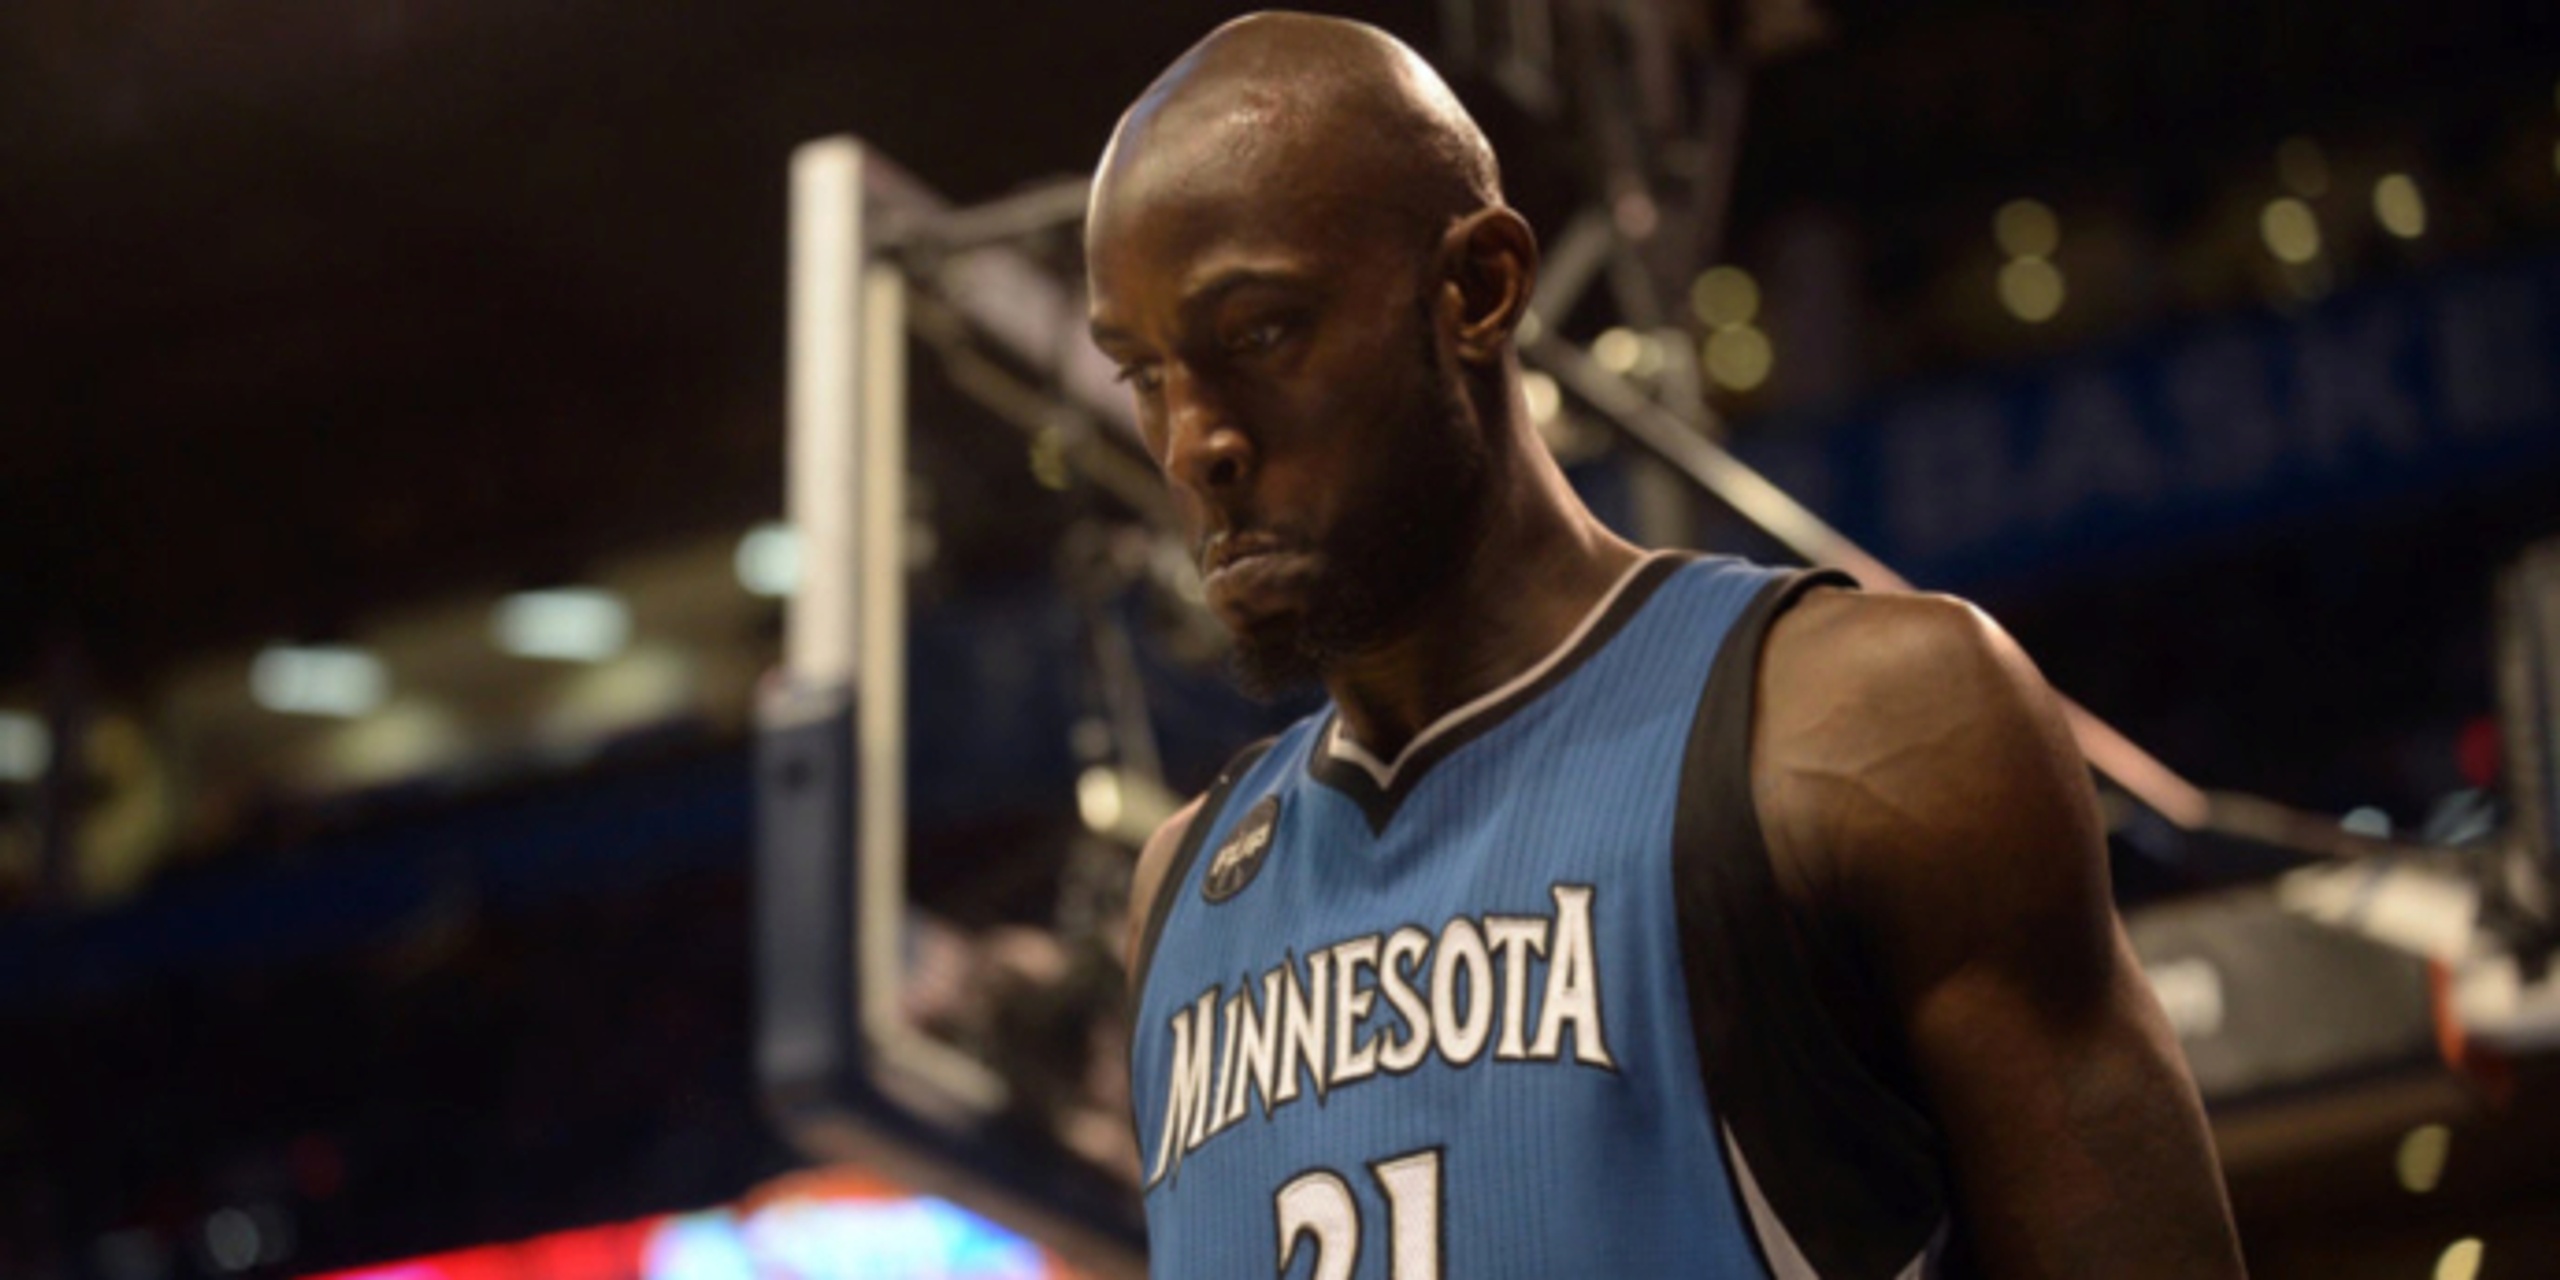 Kevin Garnett's bid to purchase Timberwolves is over